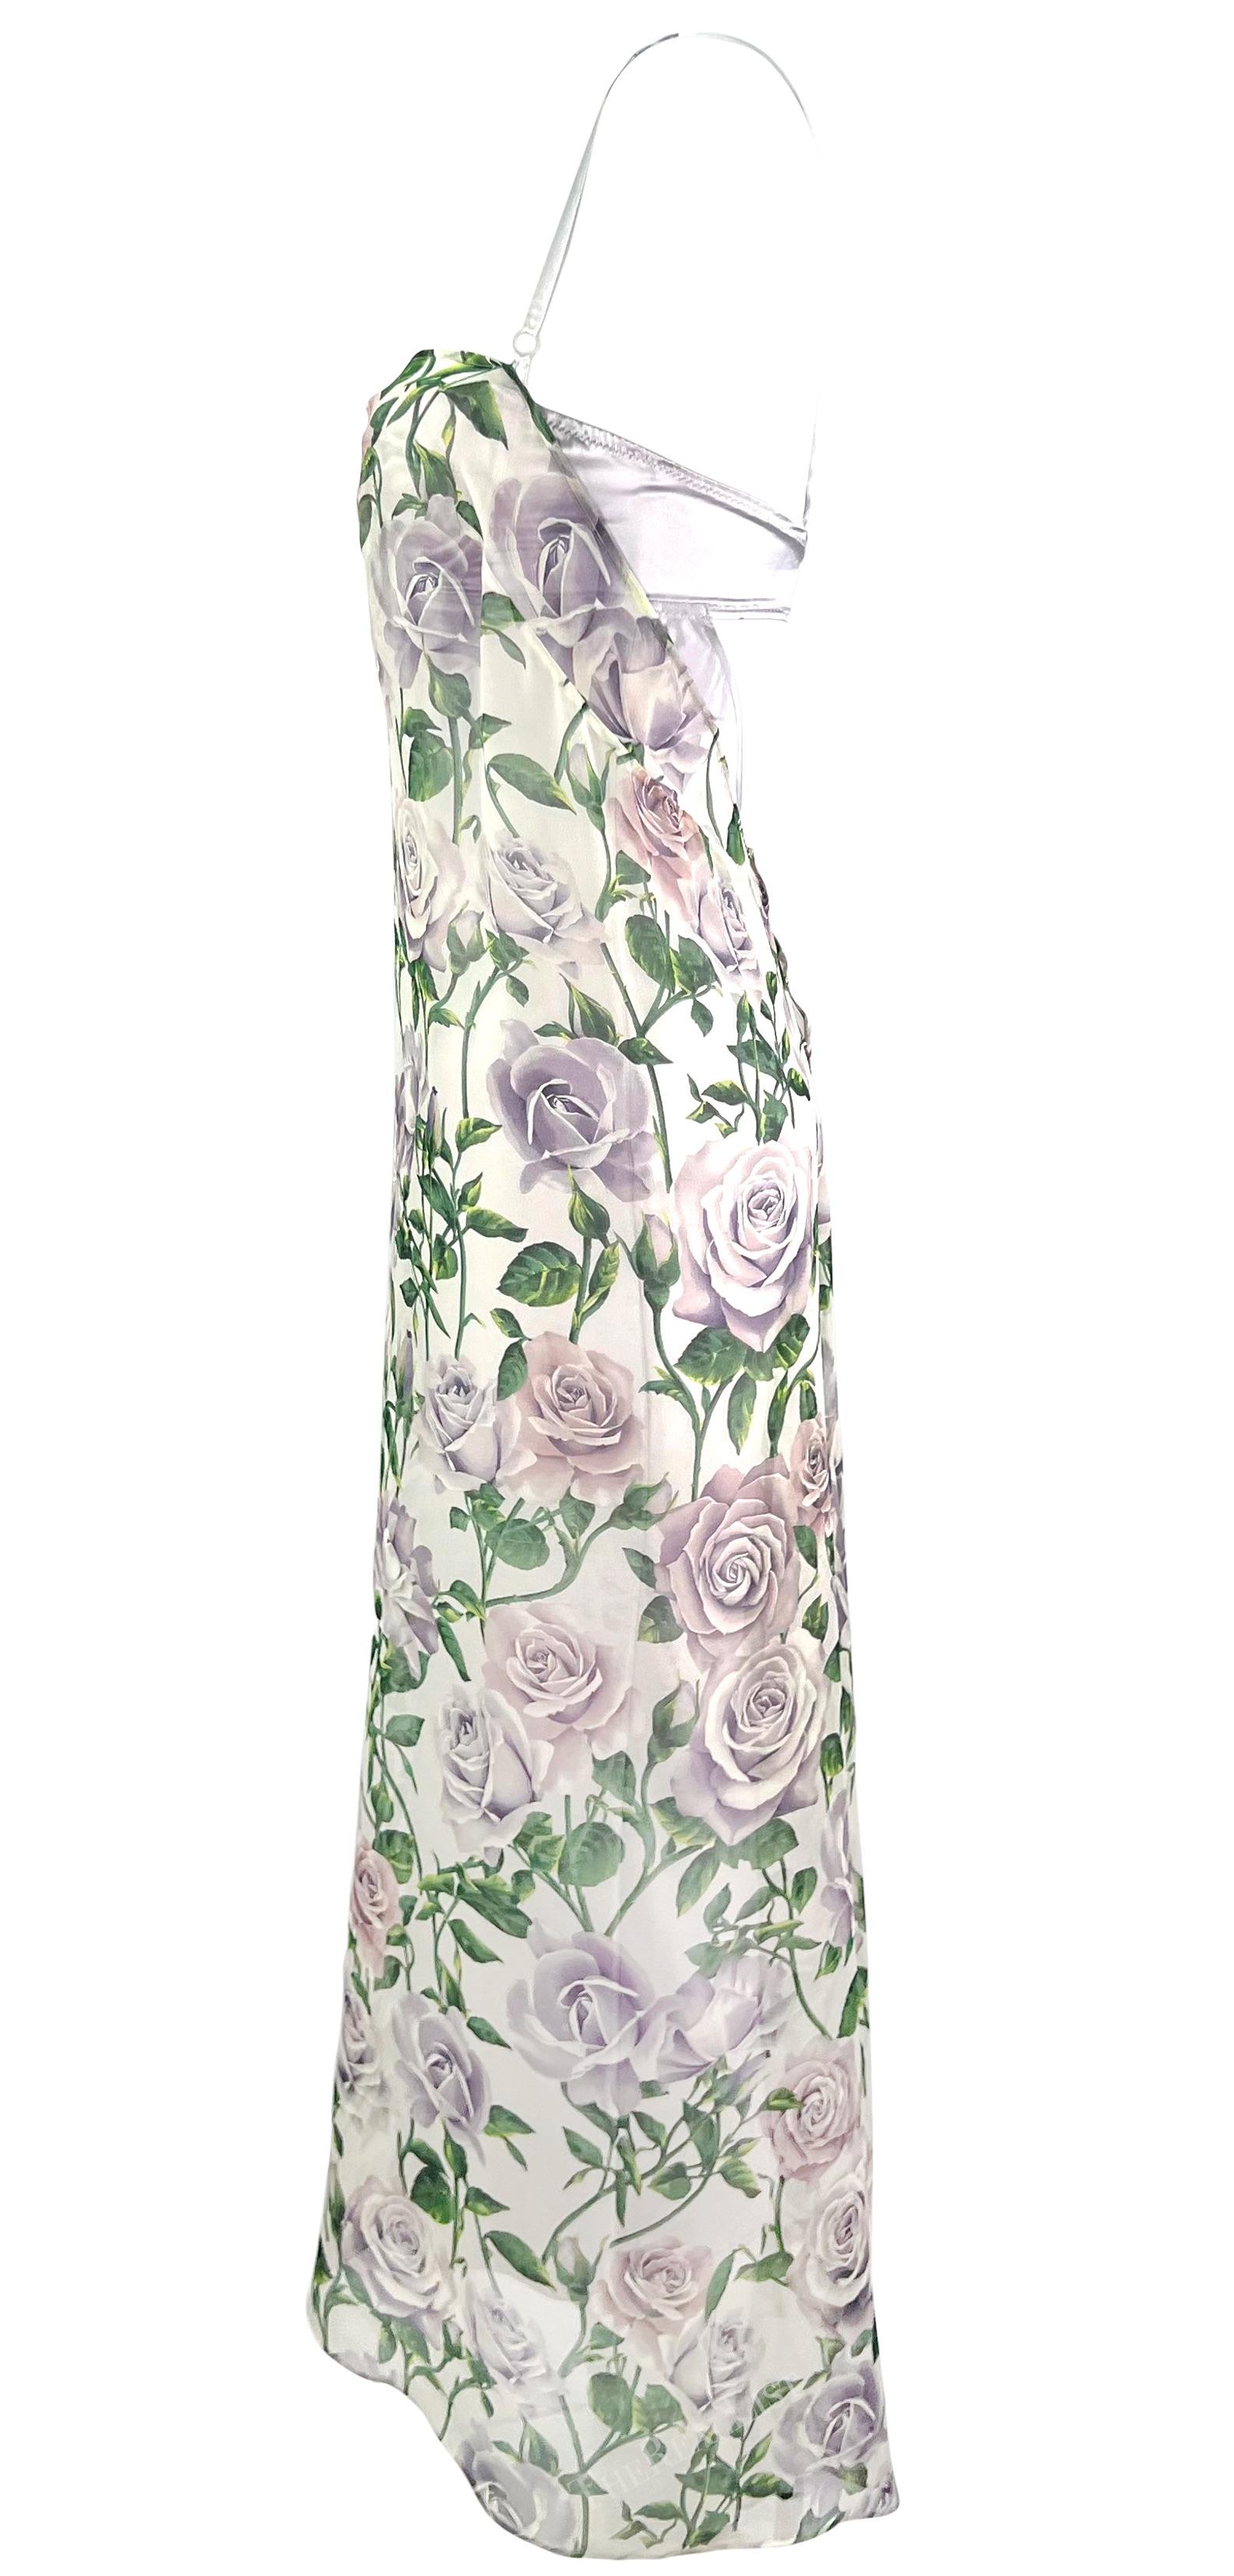 Early 2000s Dolce & Gabbana Sheer Chiffon White Purple Rose Print Overlay Gown For Sale 6